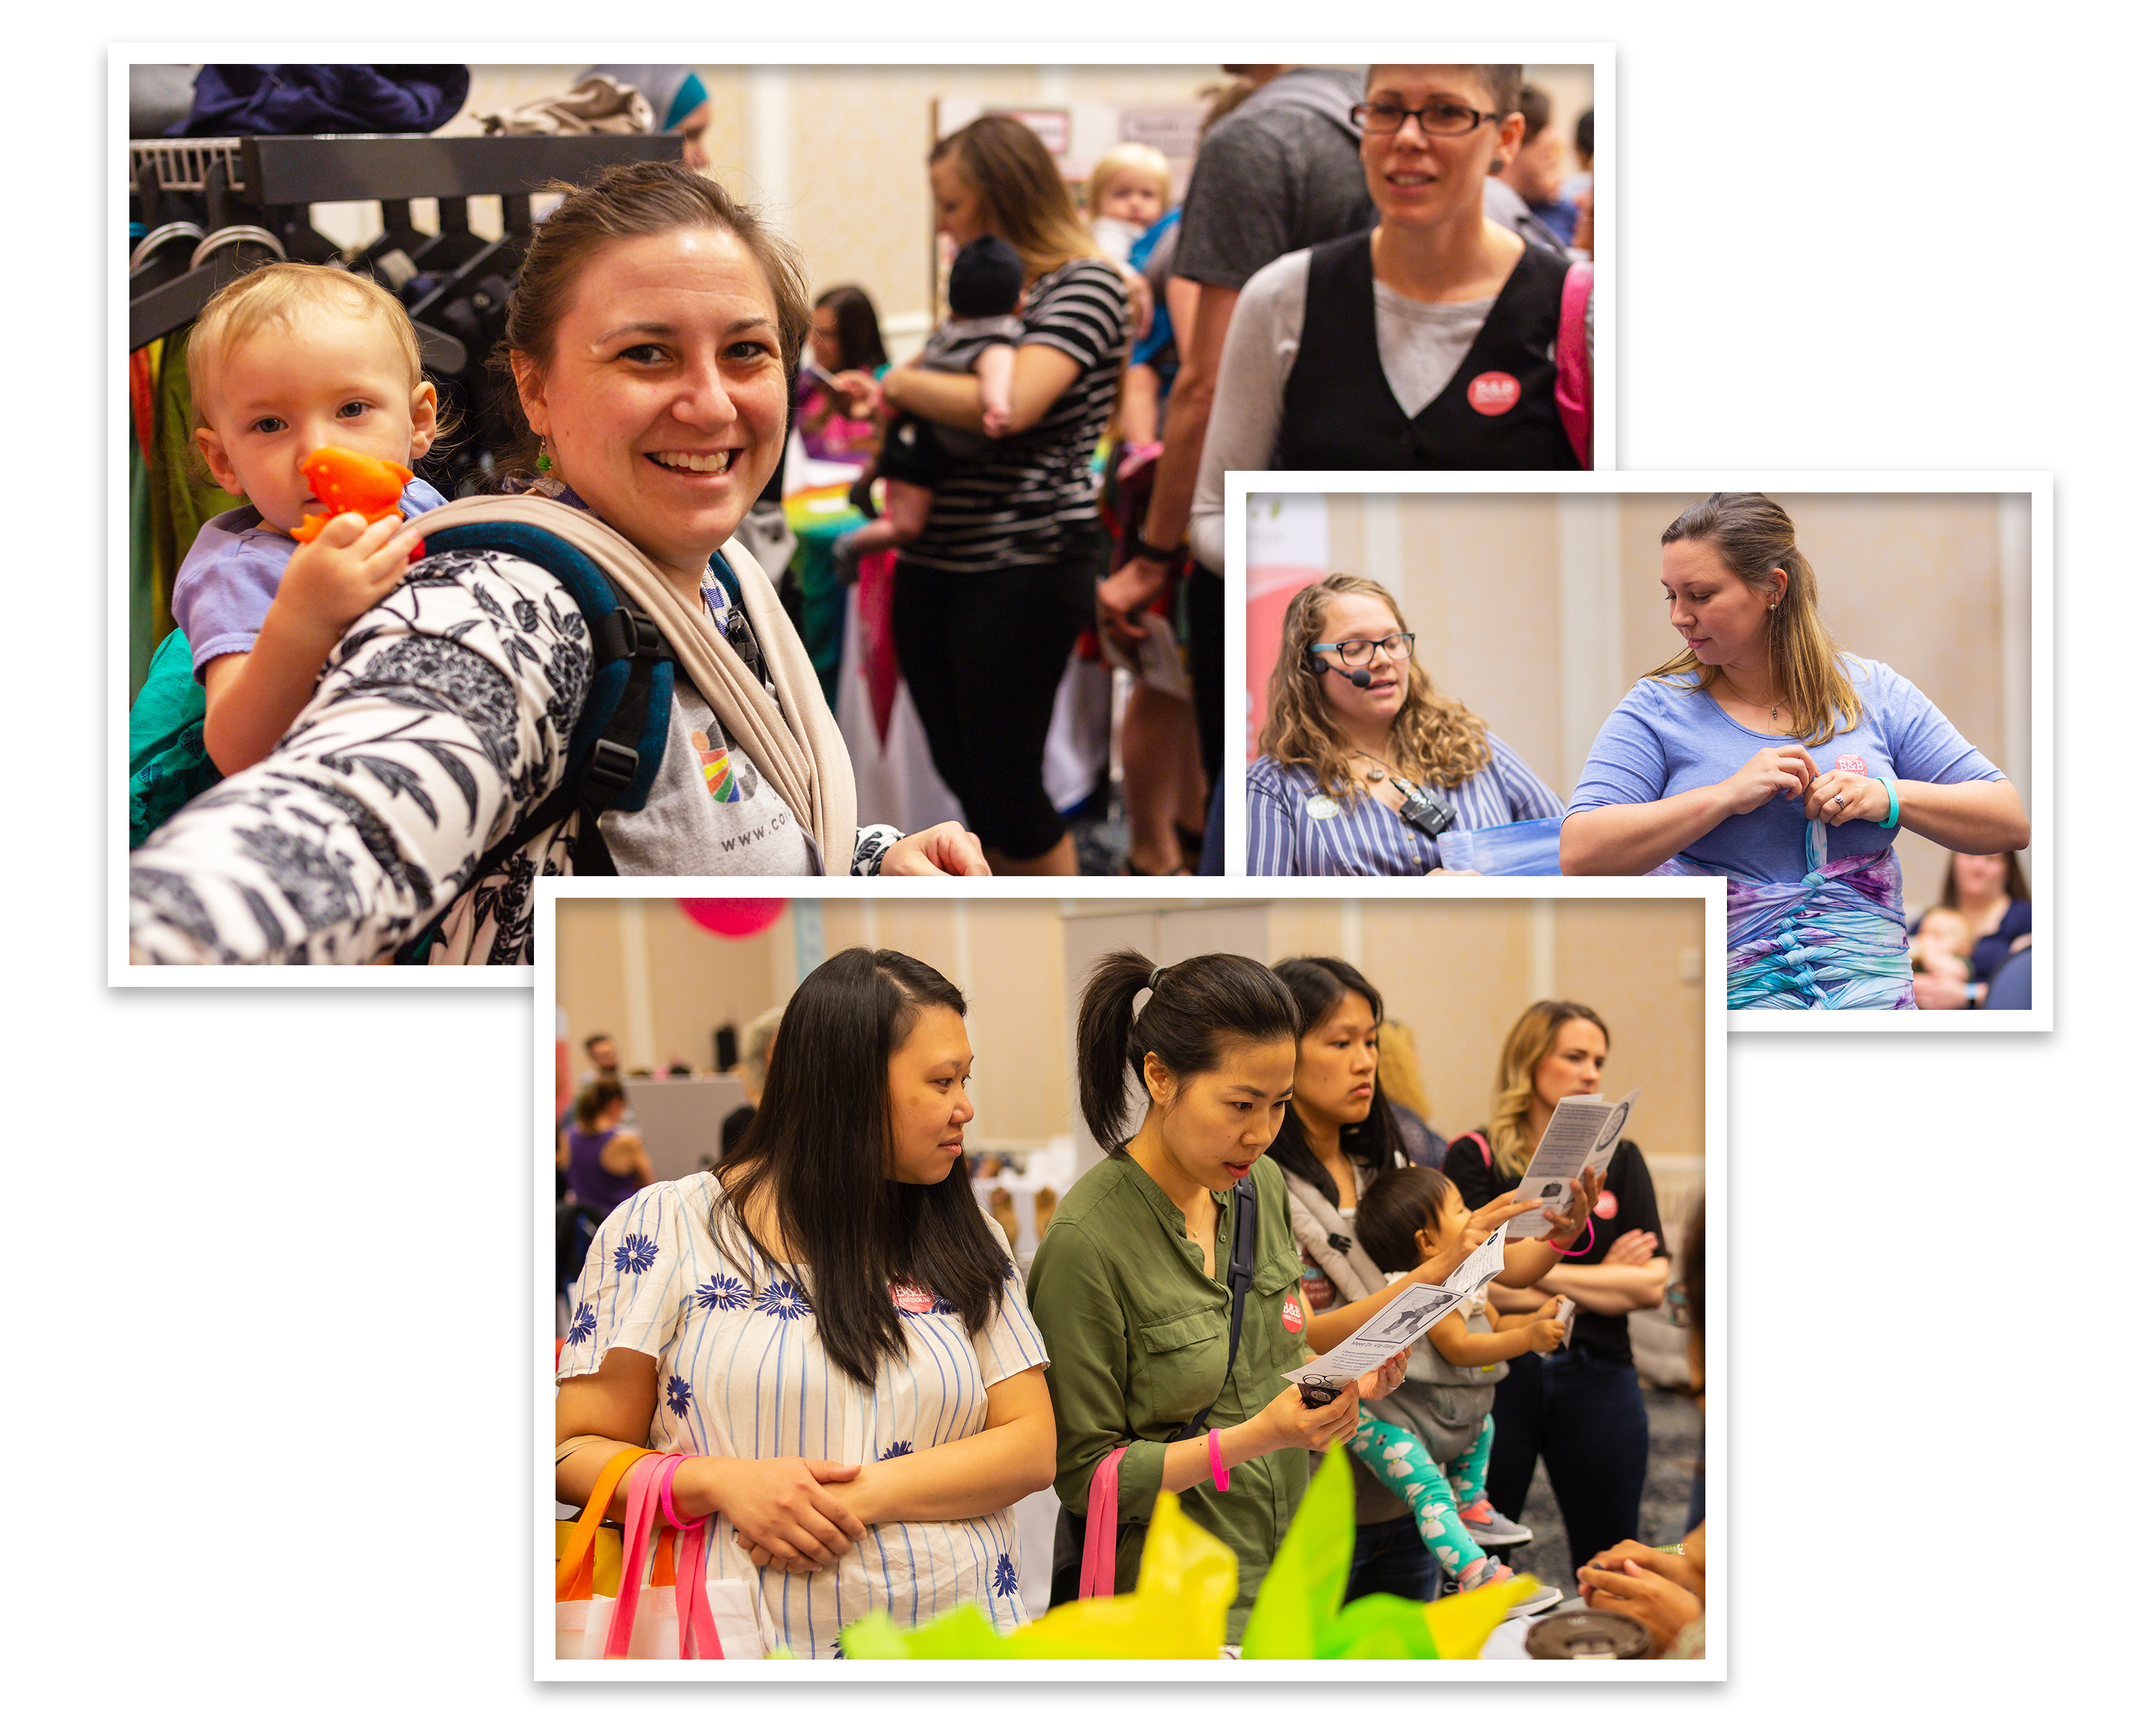 attendees at various babies & bumps events